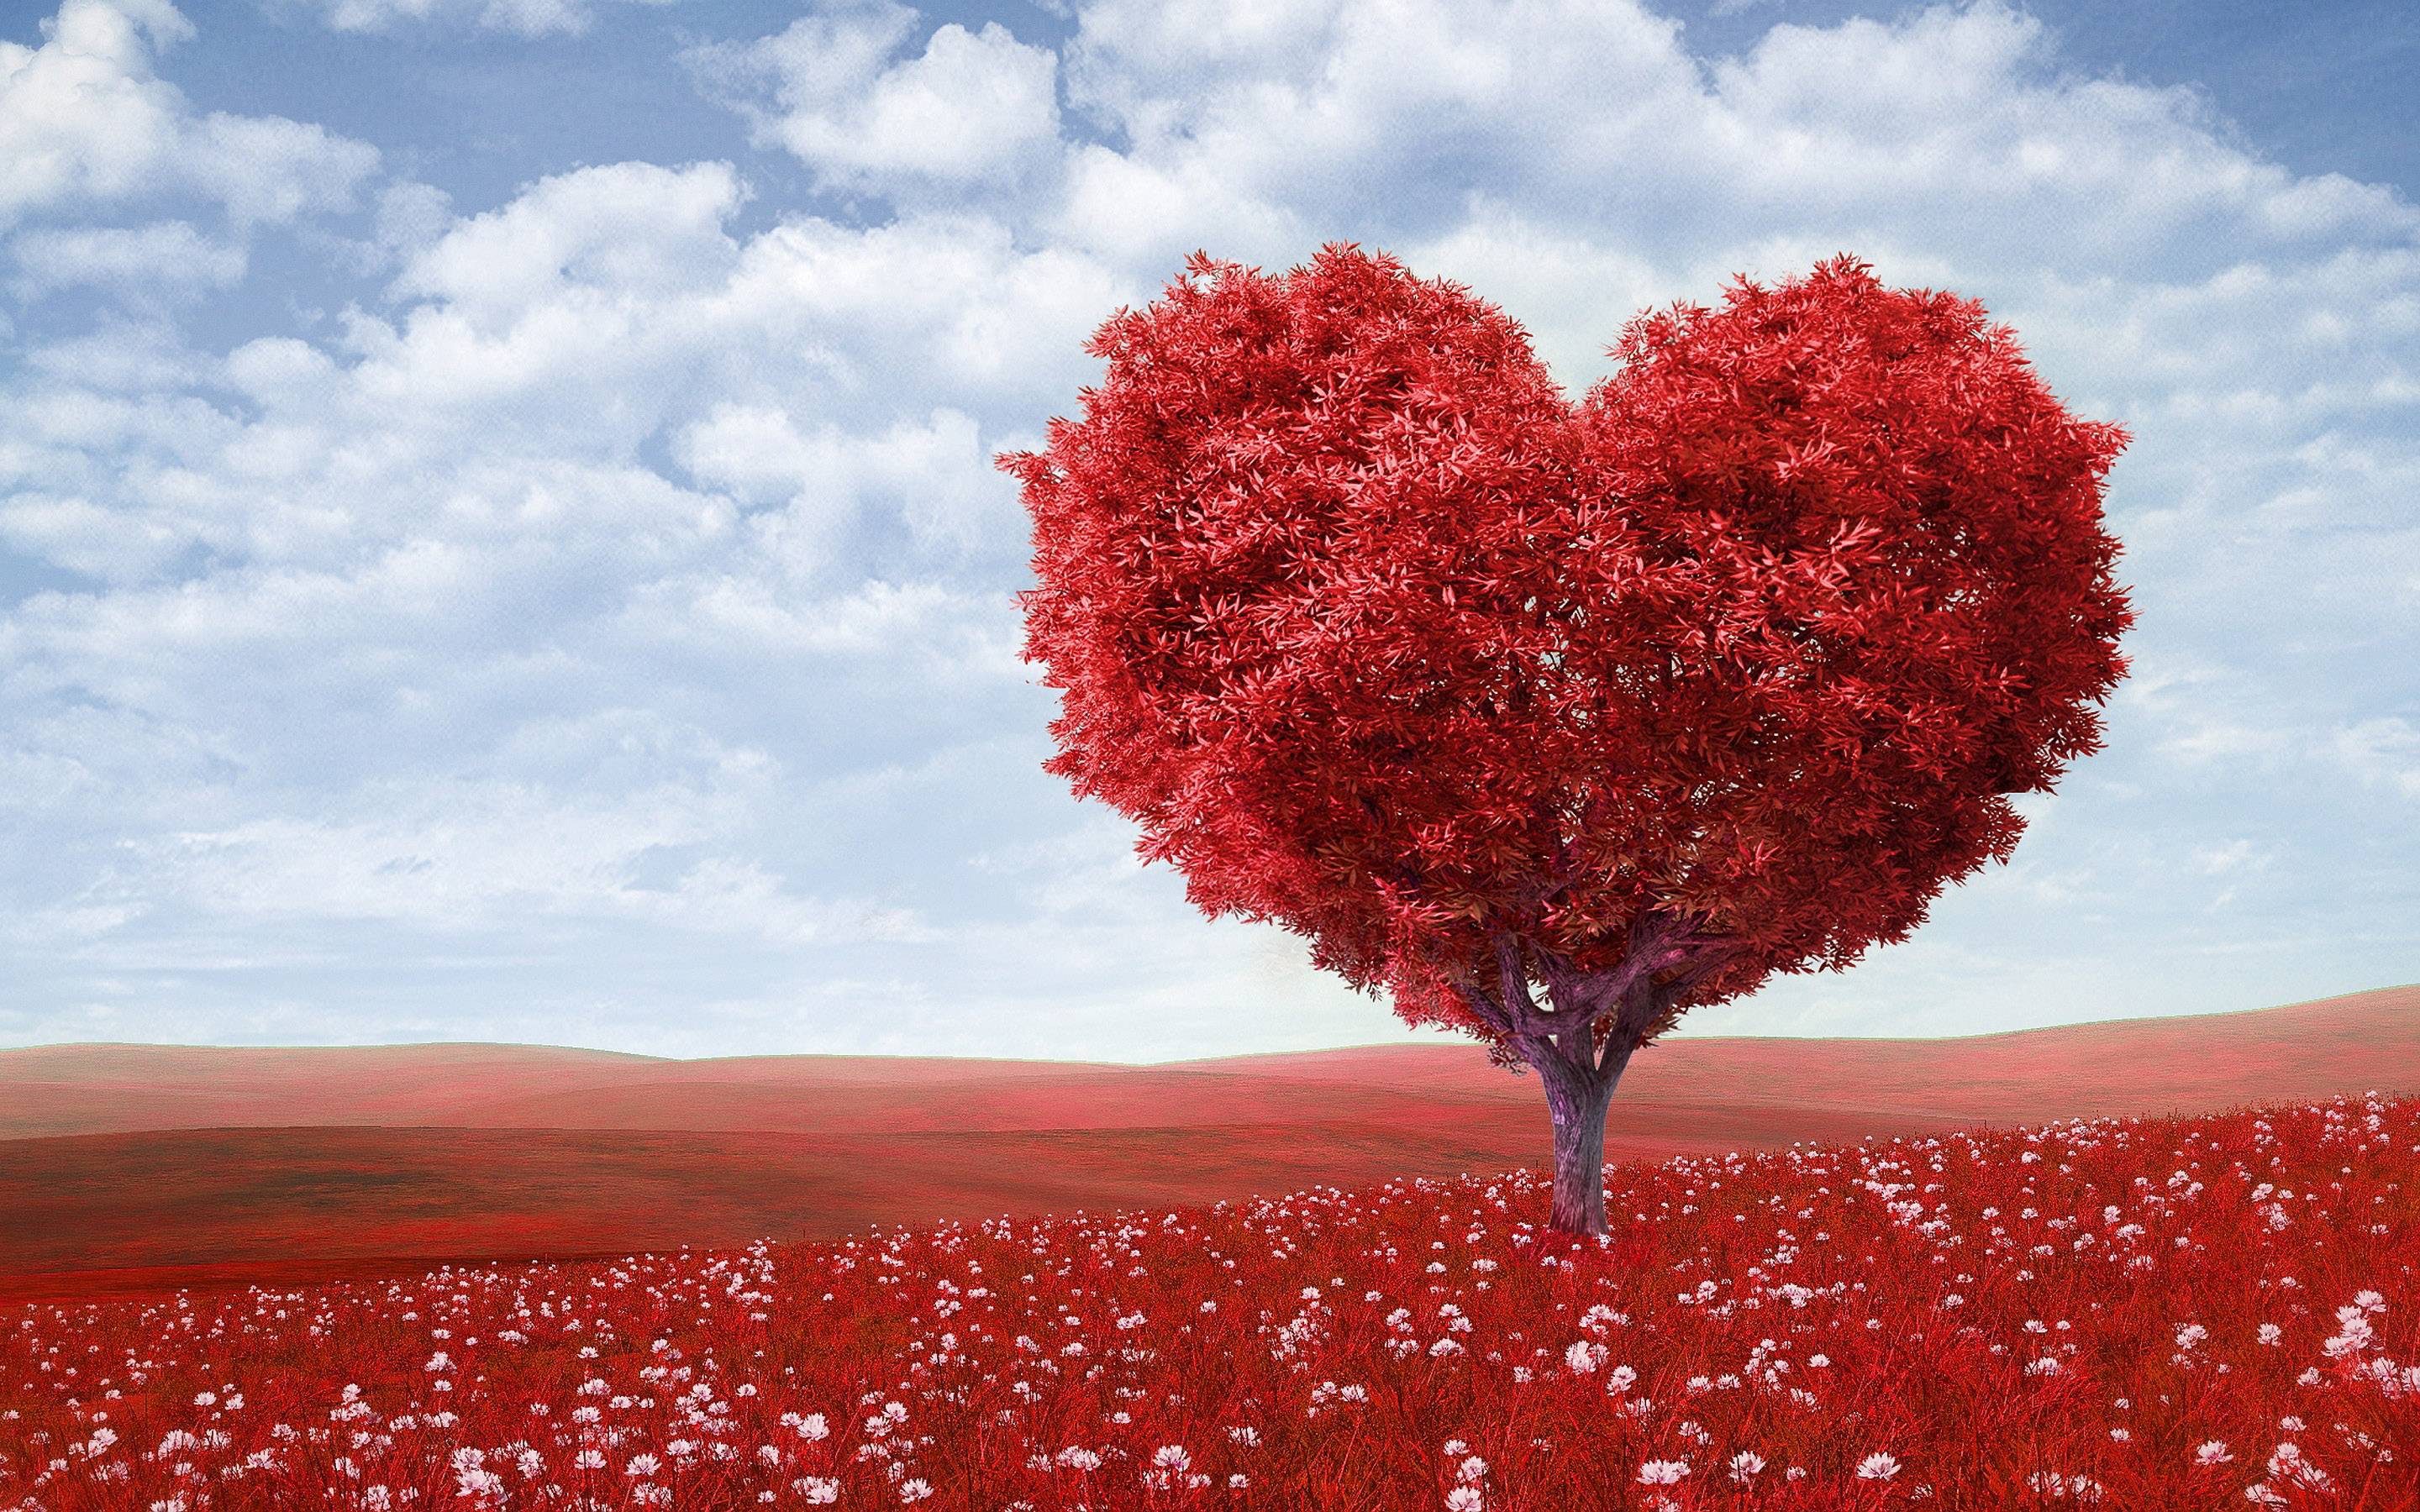 50 Adorable and Romantic Love Wallpapers Picpuddle